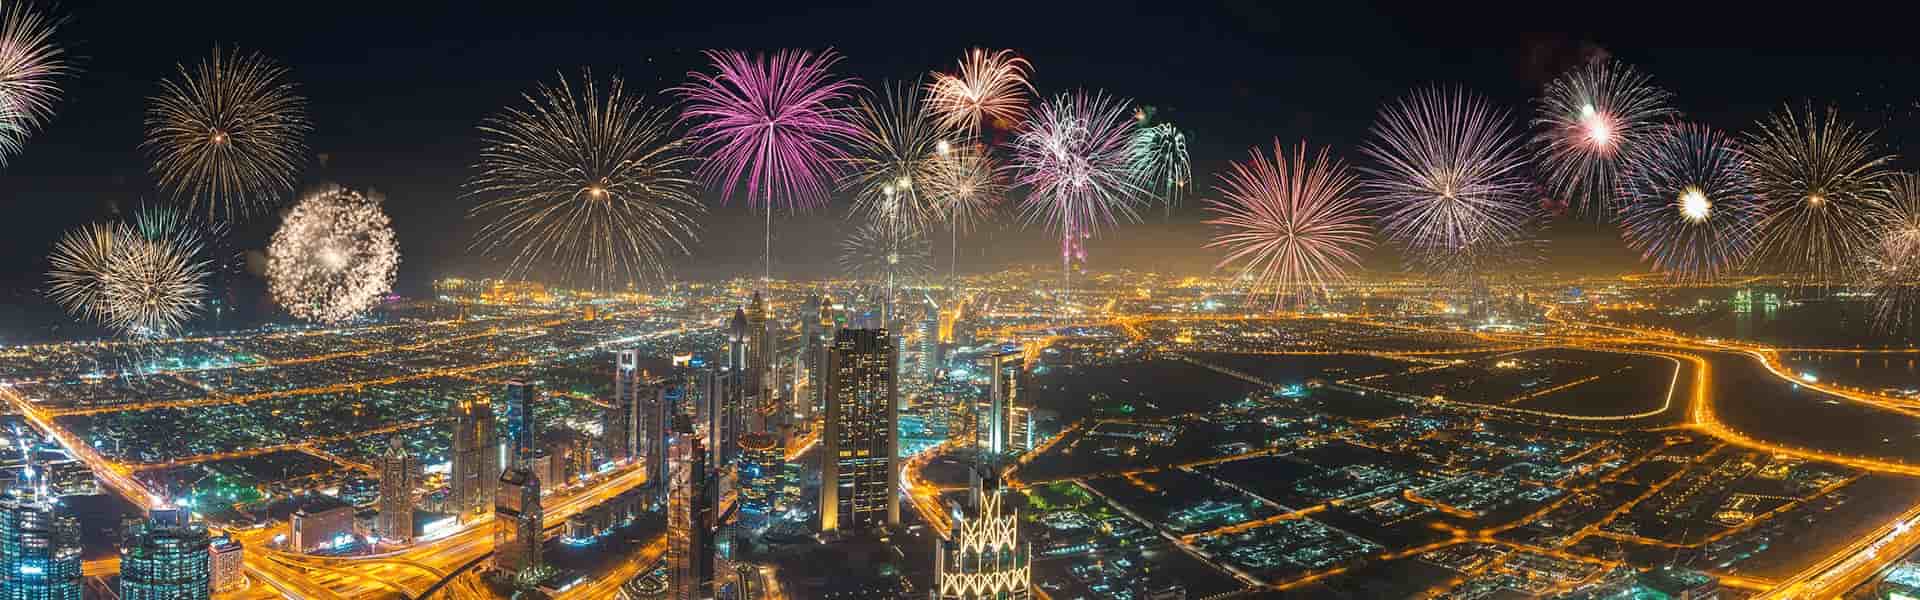 Things to do New Year’s Eve in Dubai Big Bus Tours